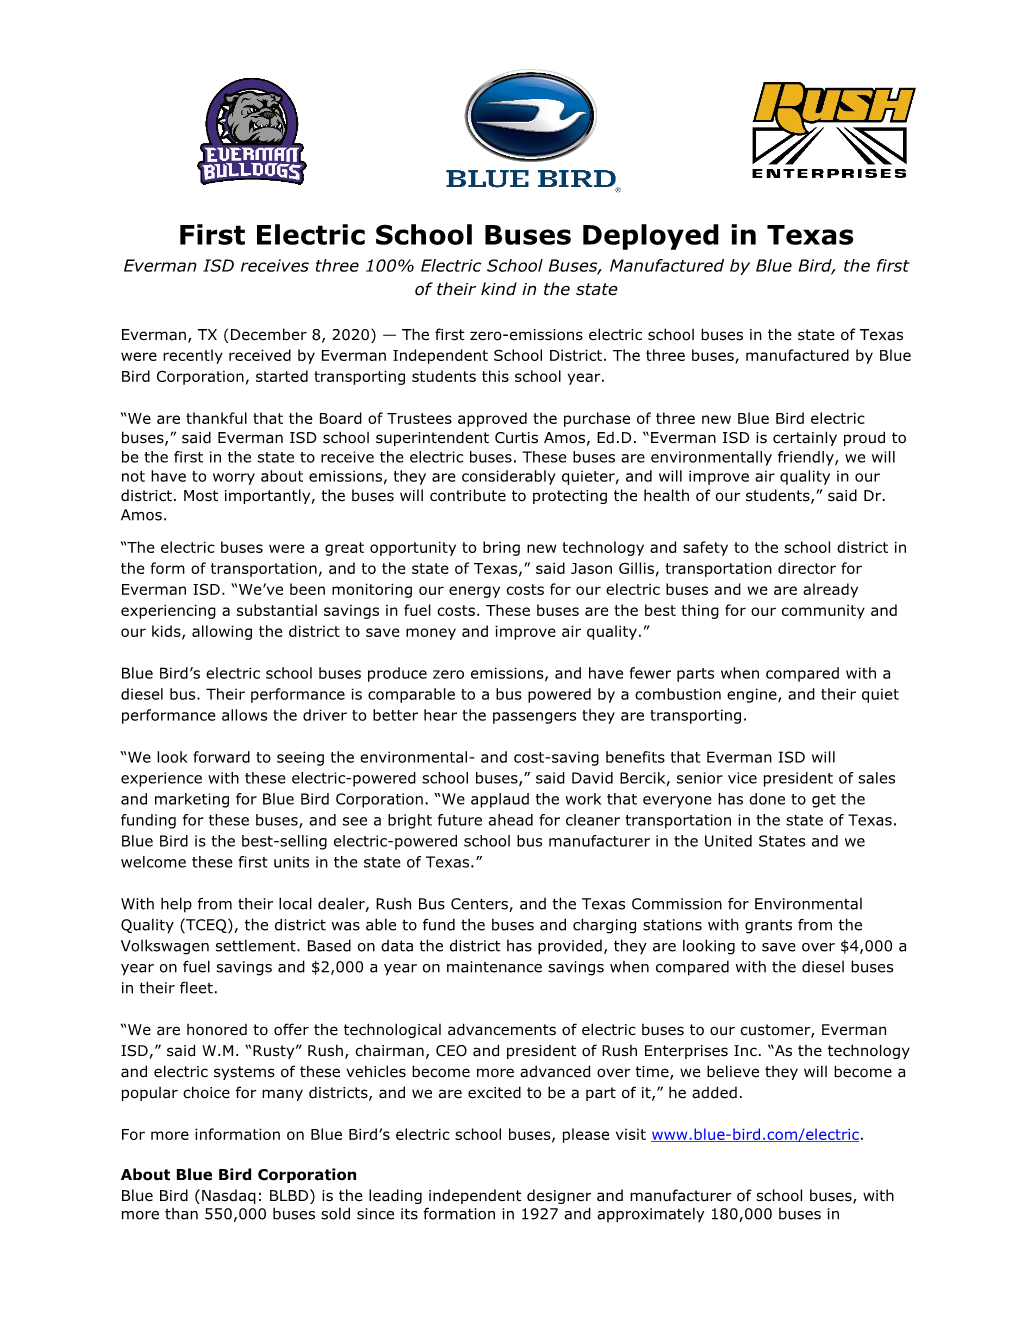 First Electric School Buses Deployed in Texas Everman ISD Receives Three 100% Electric School Buses, Manufactured by Blue Bird, the First of Their Kind in the State